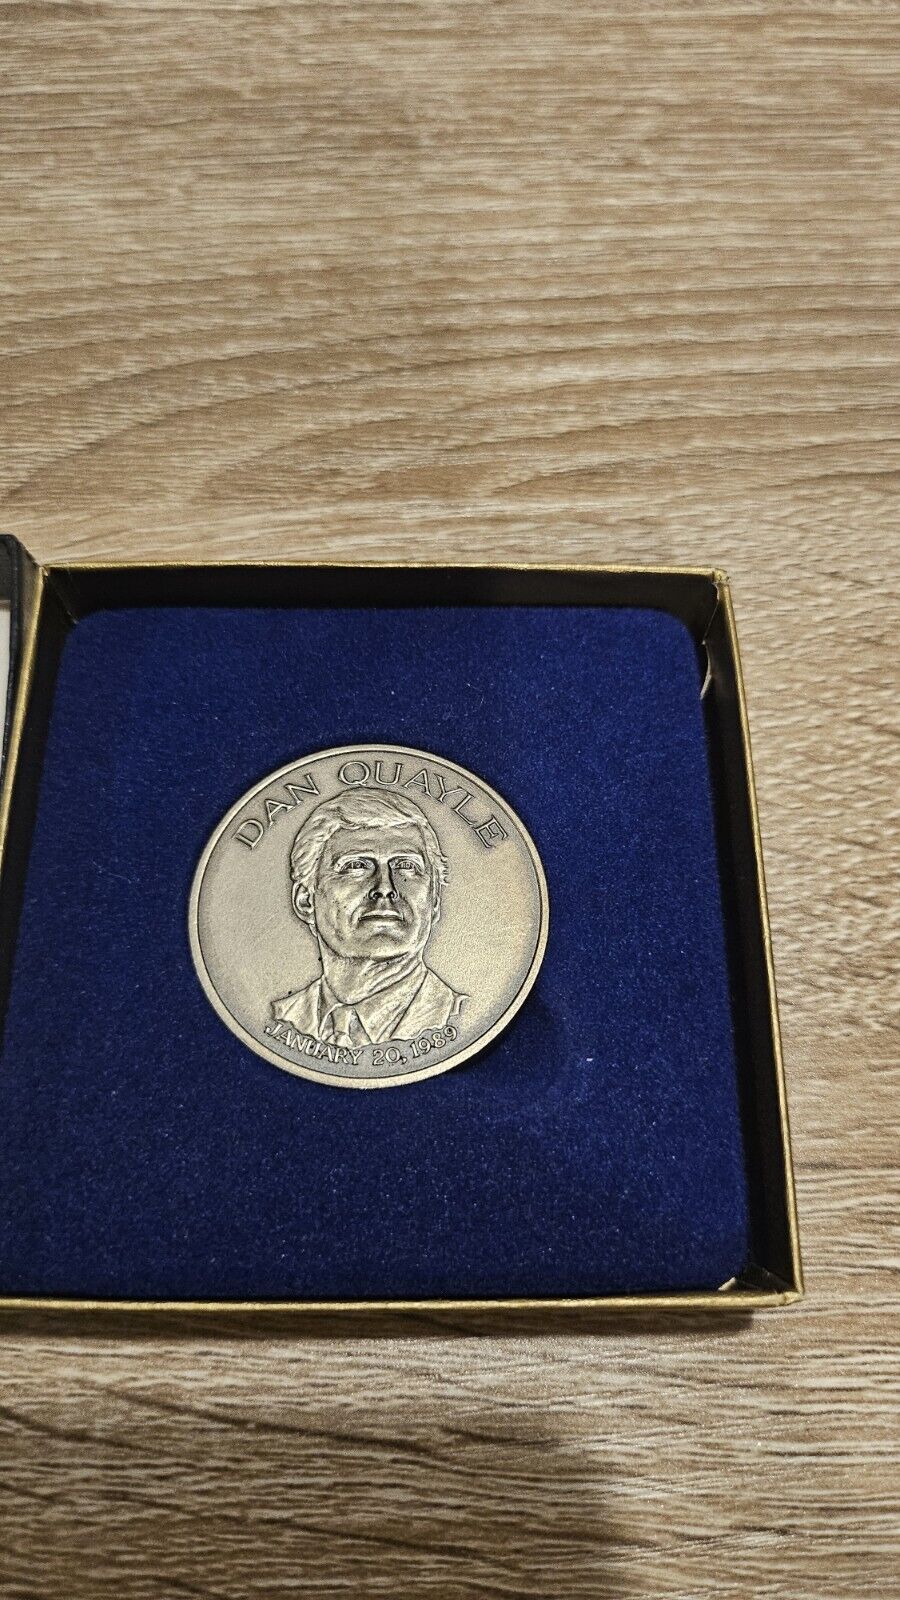 Official Vice President Dan Quayle Challenge Coin, Jan 20, 1989 In Box